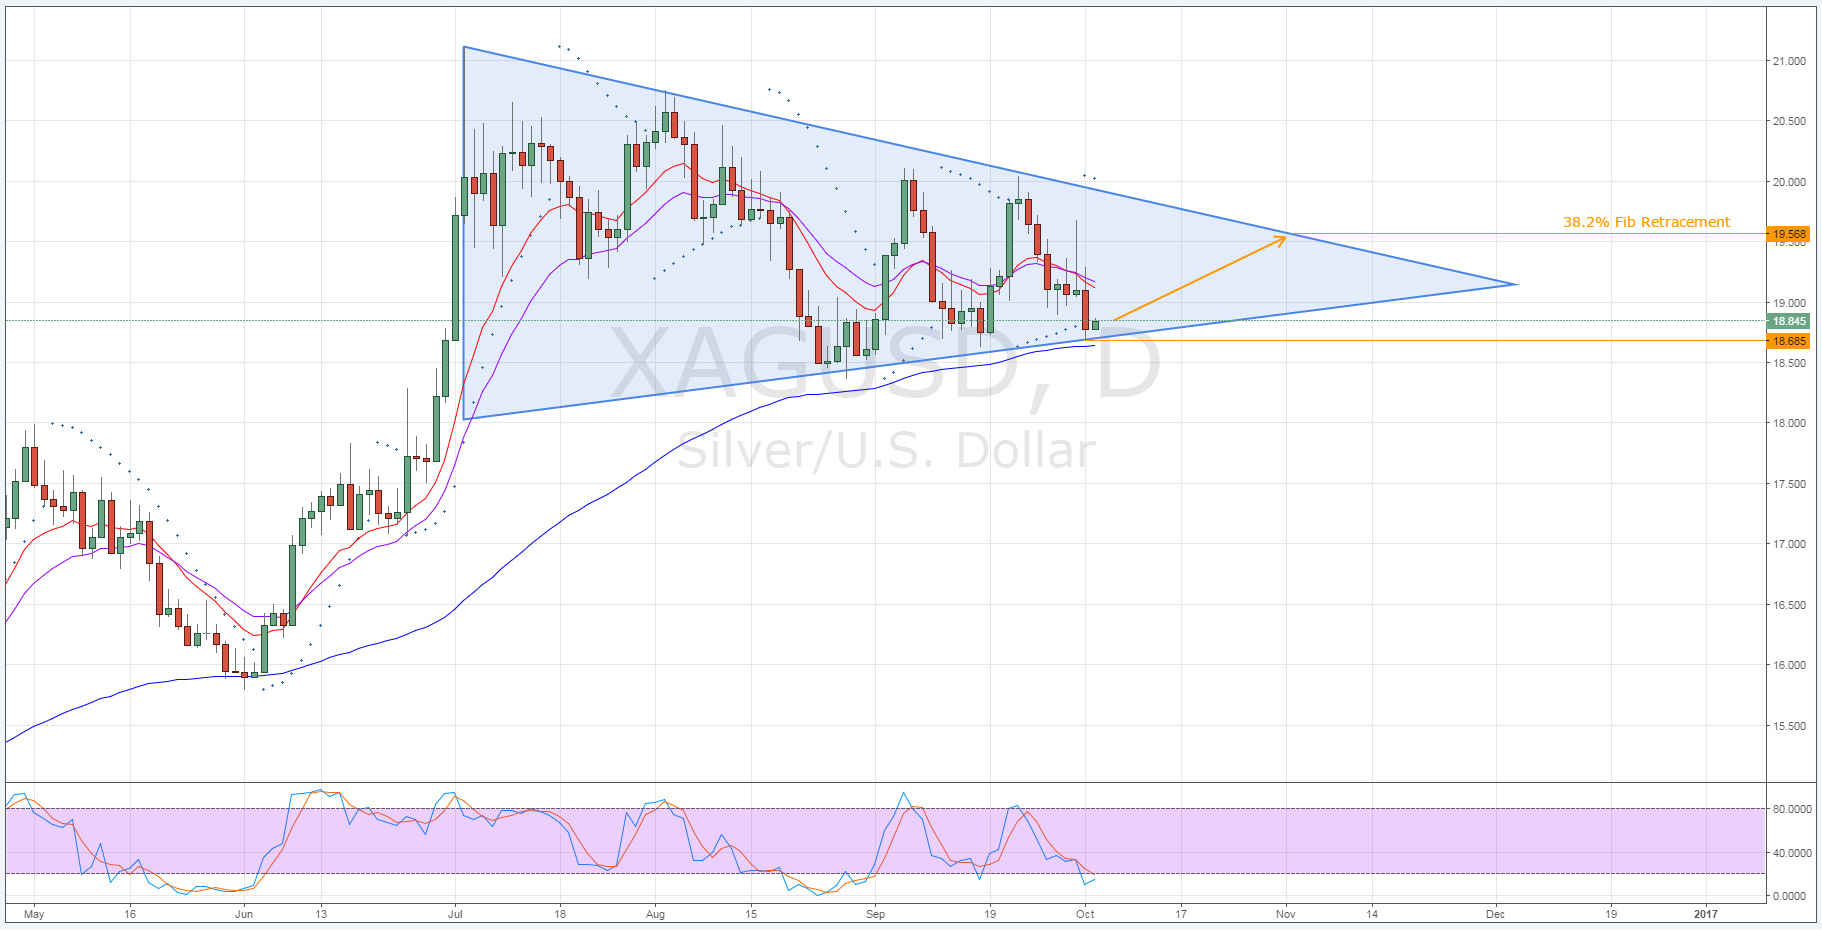 Silver/US Dollar Daily Chart